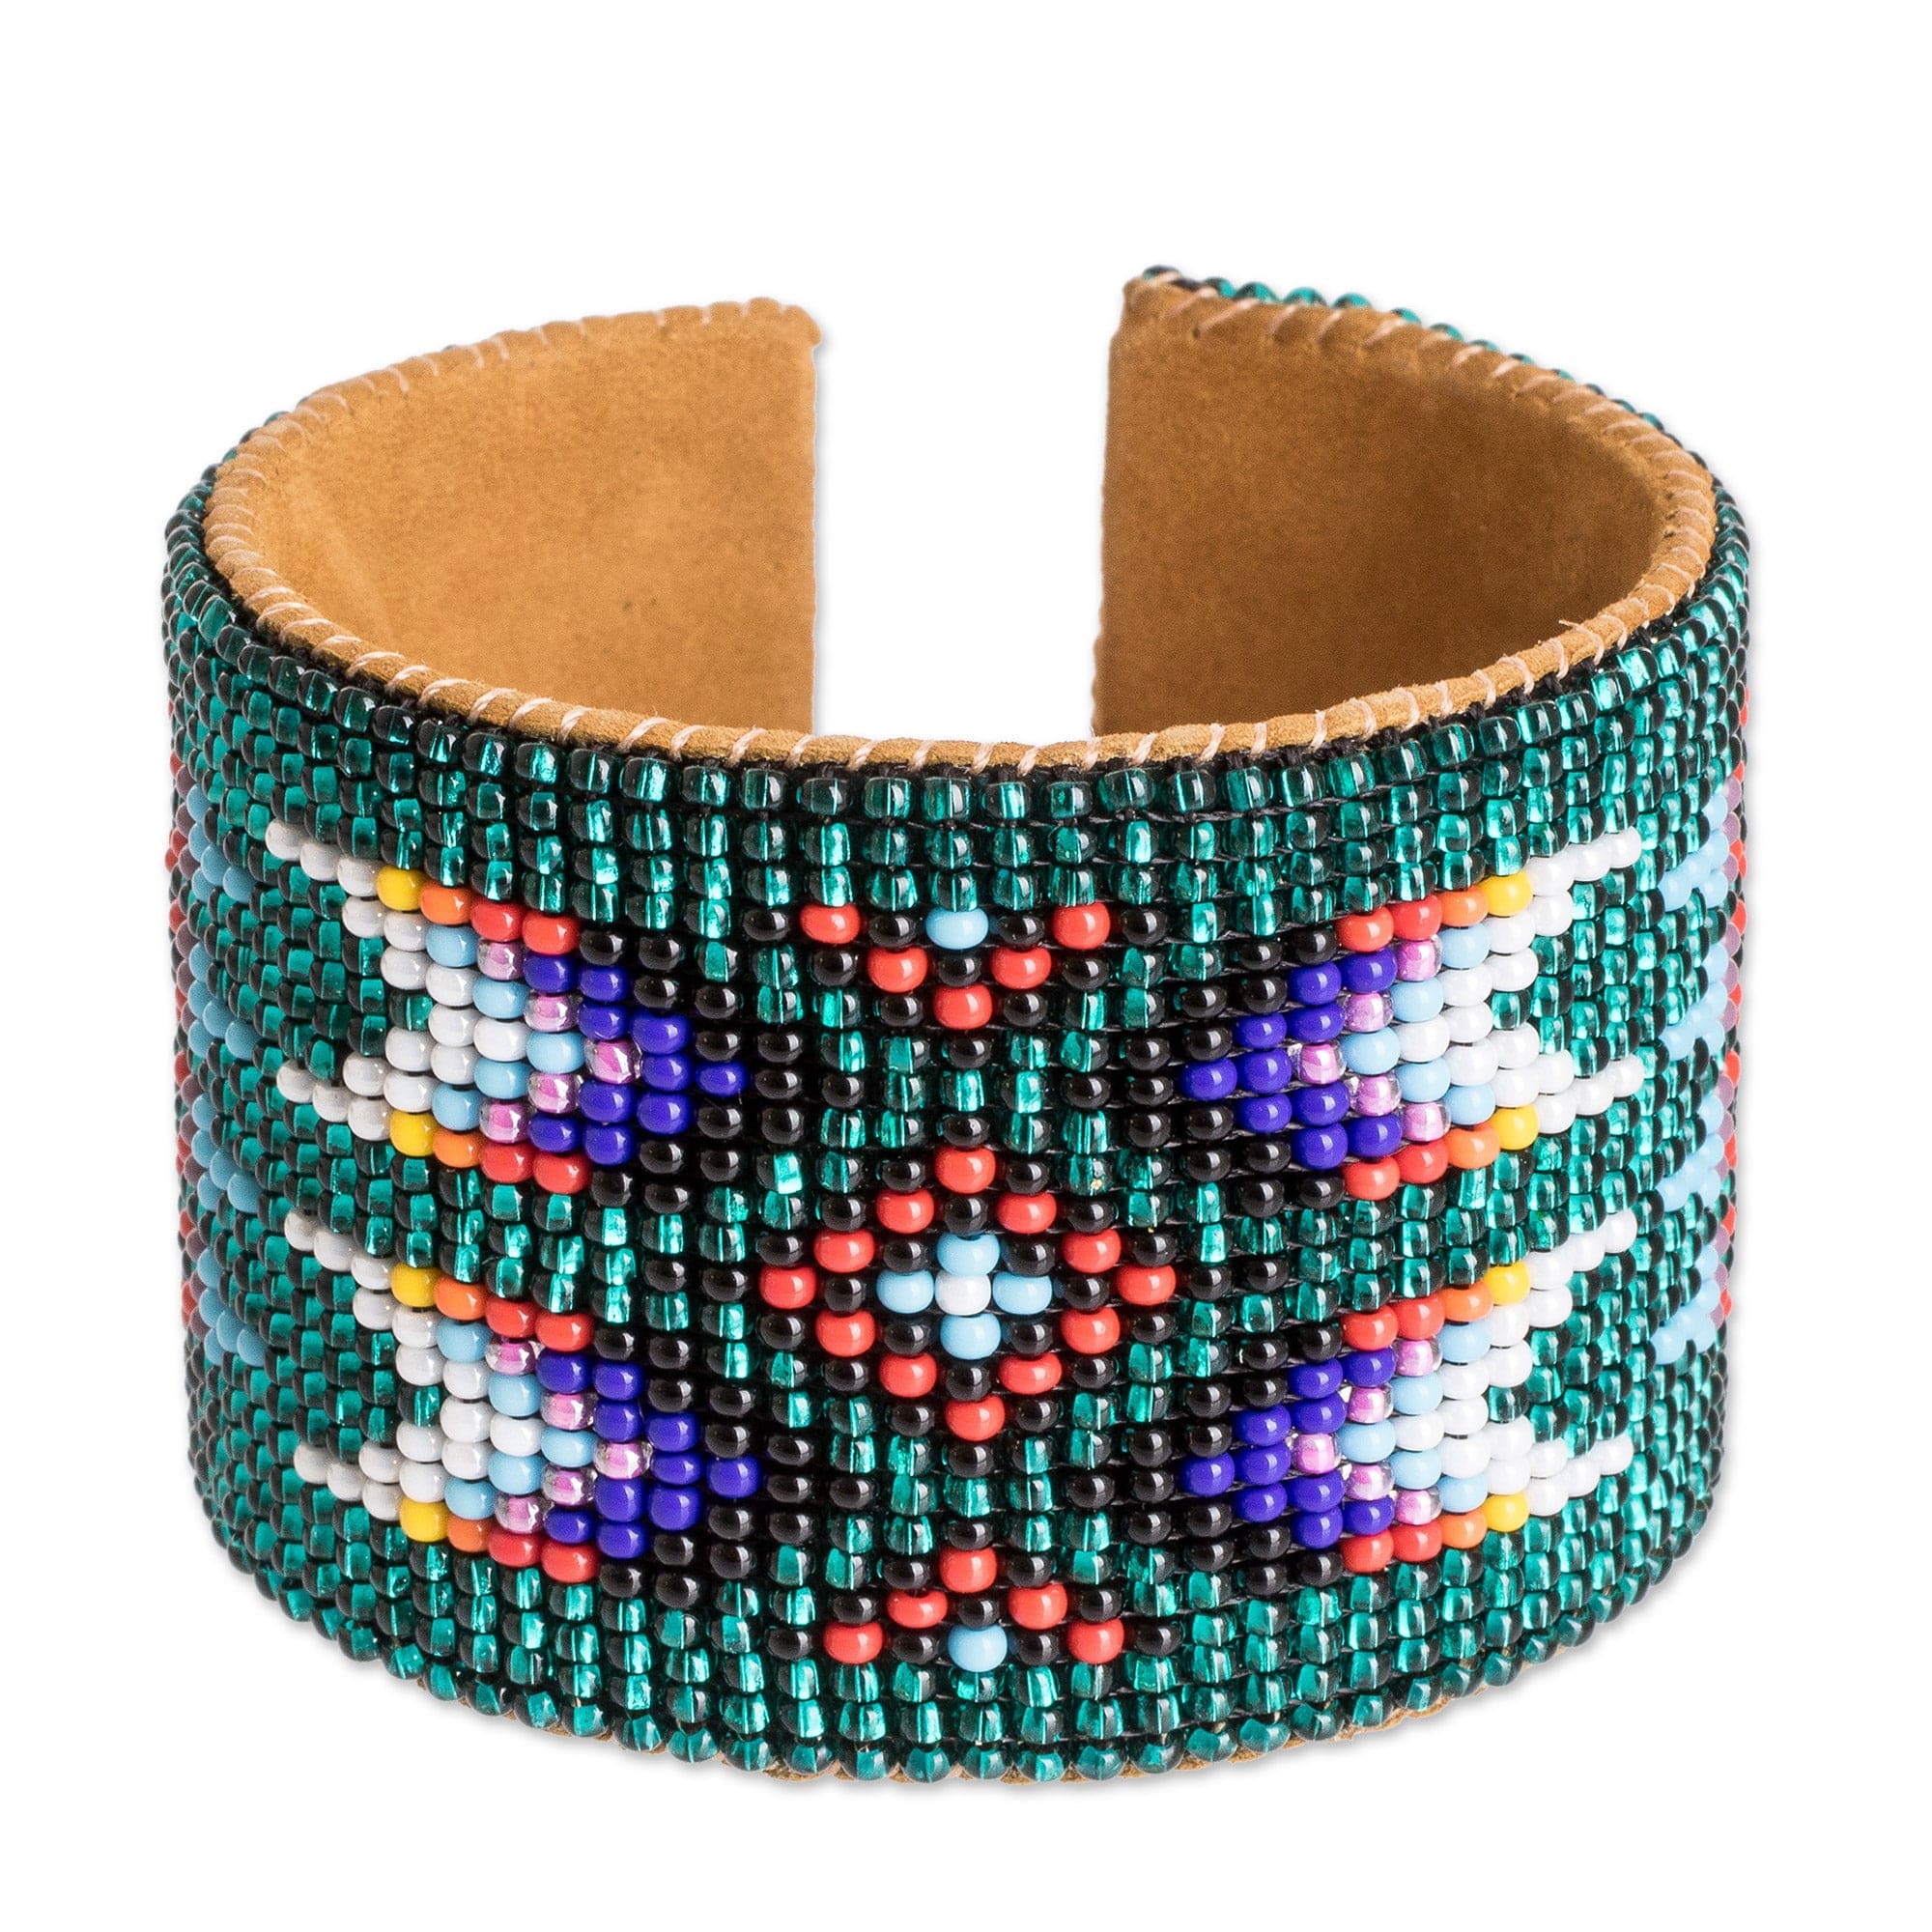 Handmade, fair Trade Bracelet Made with Seed Beads from Guatemala